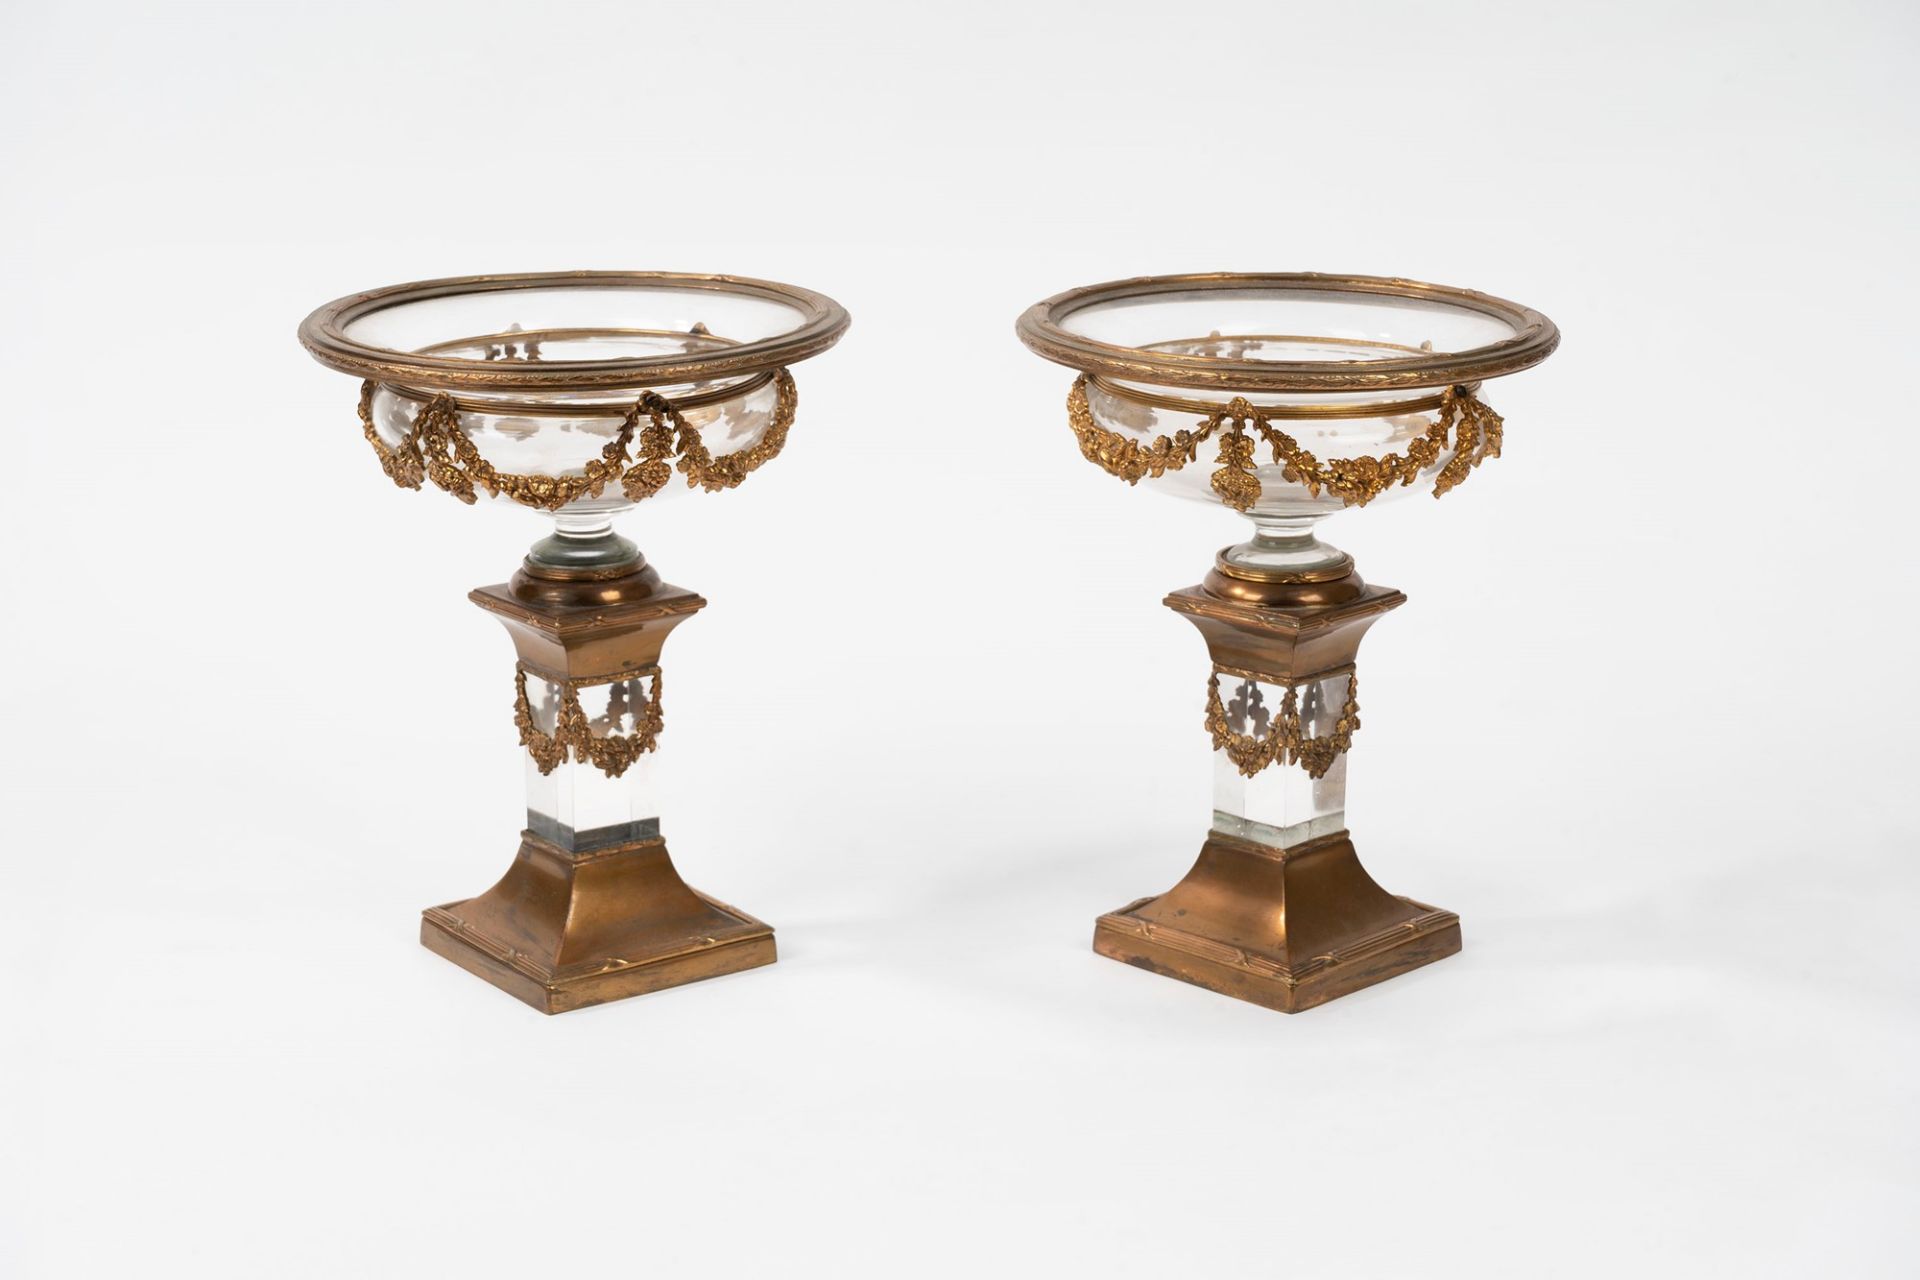 Pair of gilded bronze and crystal risers, France, 20th century